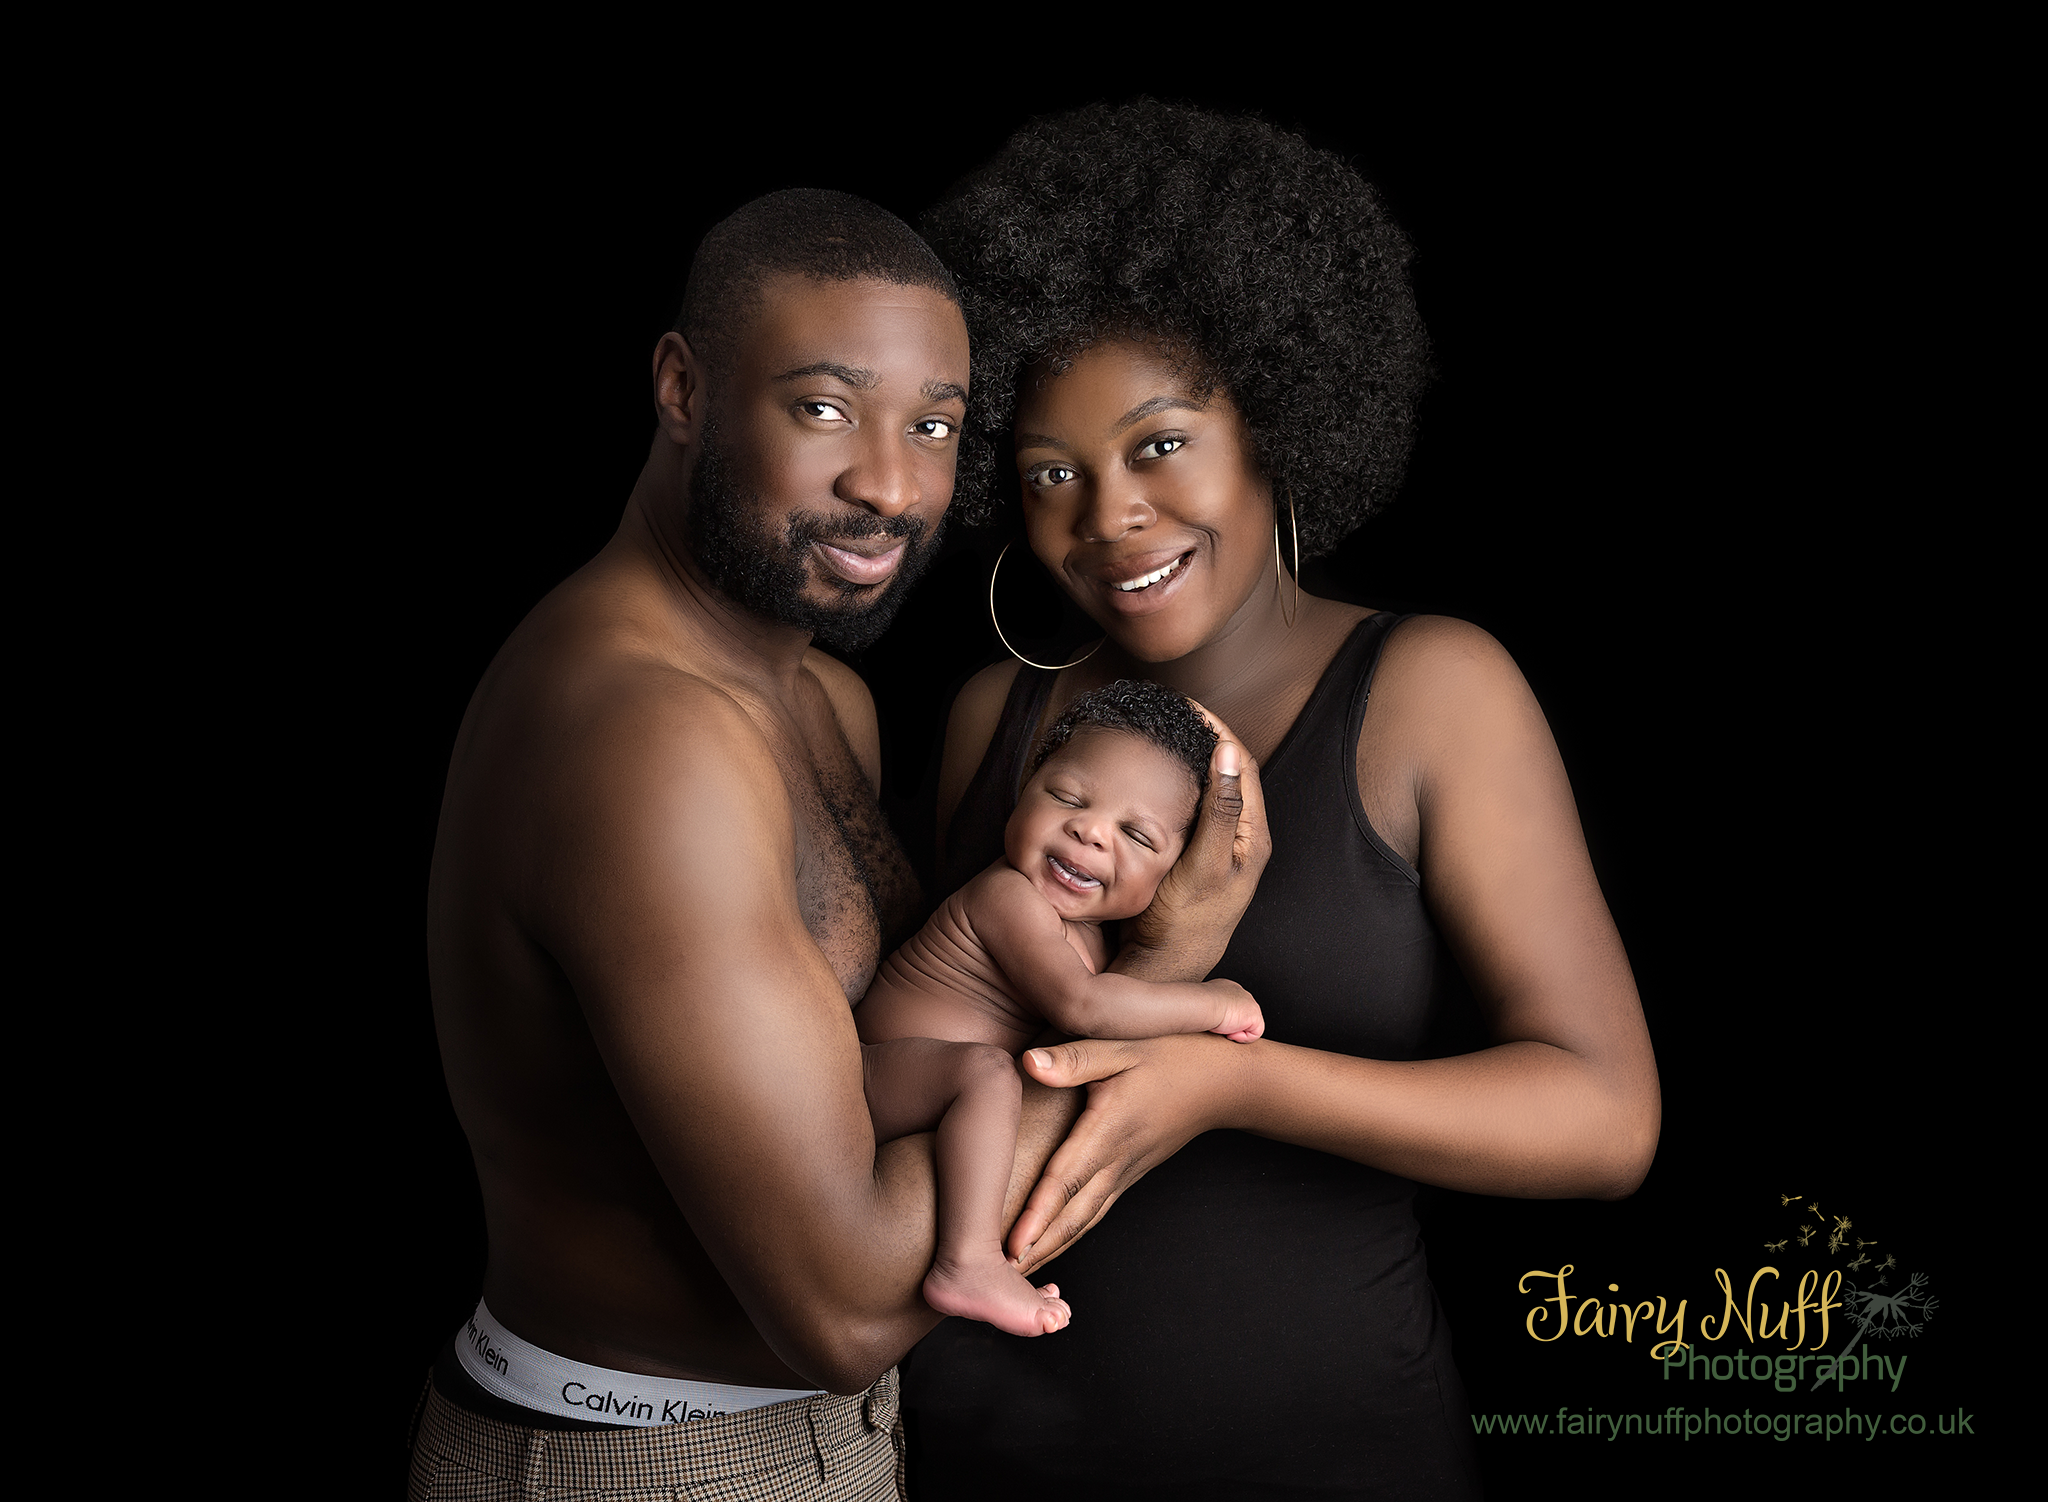 Mu and Dad holding a smiling newborn baby in their arms, facing eachother against a black background. Newborn photoshoot at Fairy Nuff Photography, Nottingham